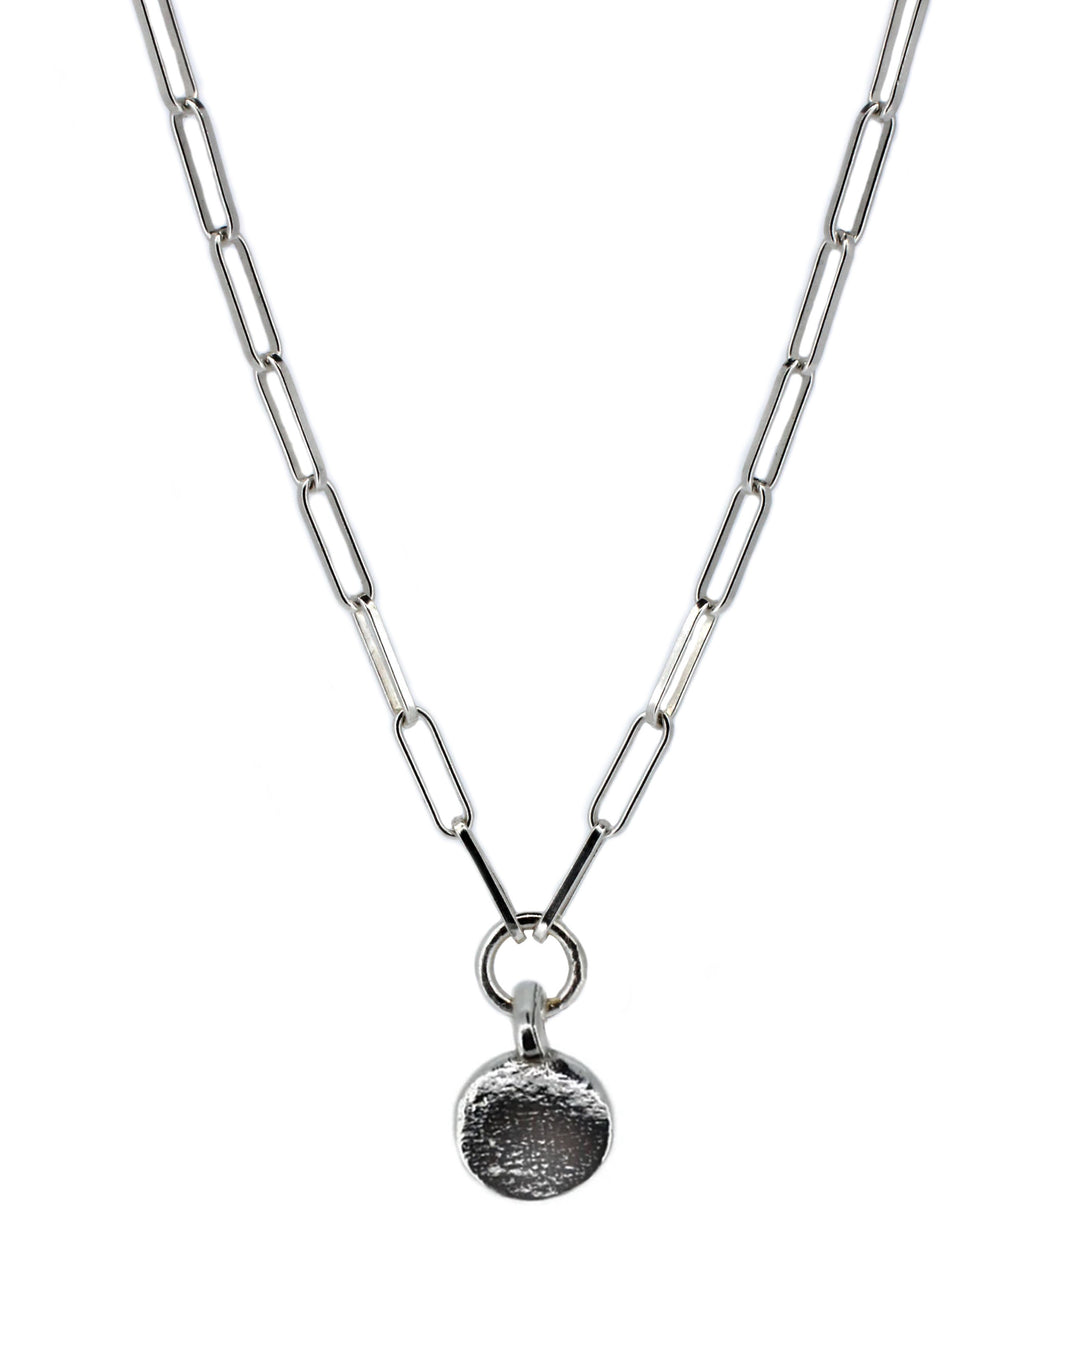 New Moon Trace Chain Necklace